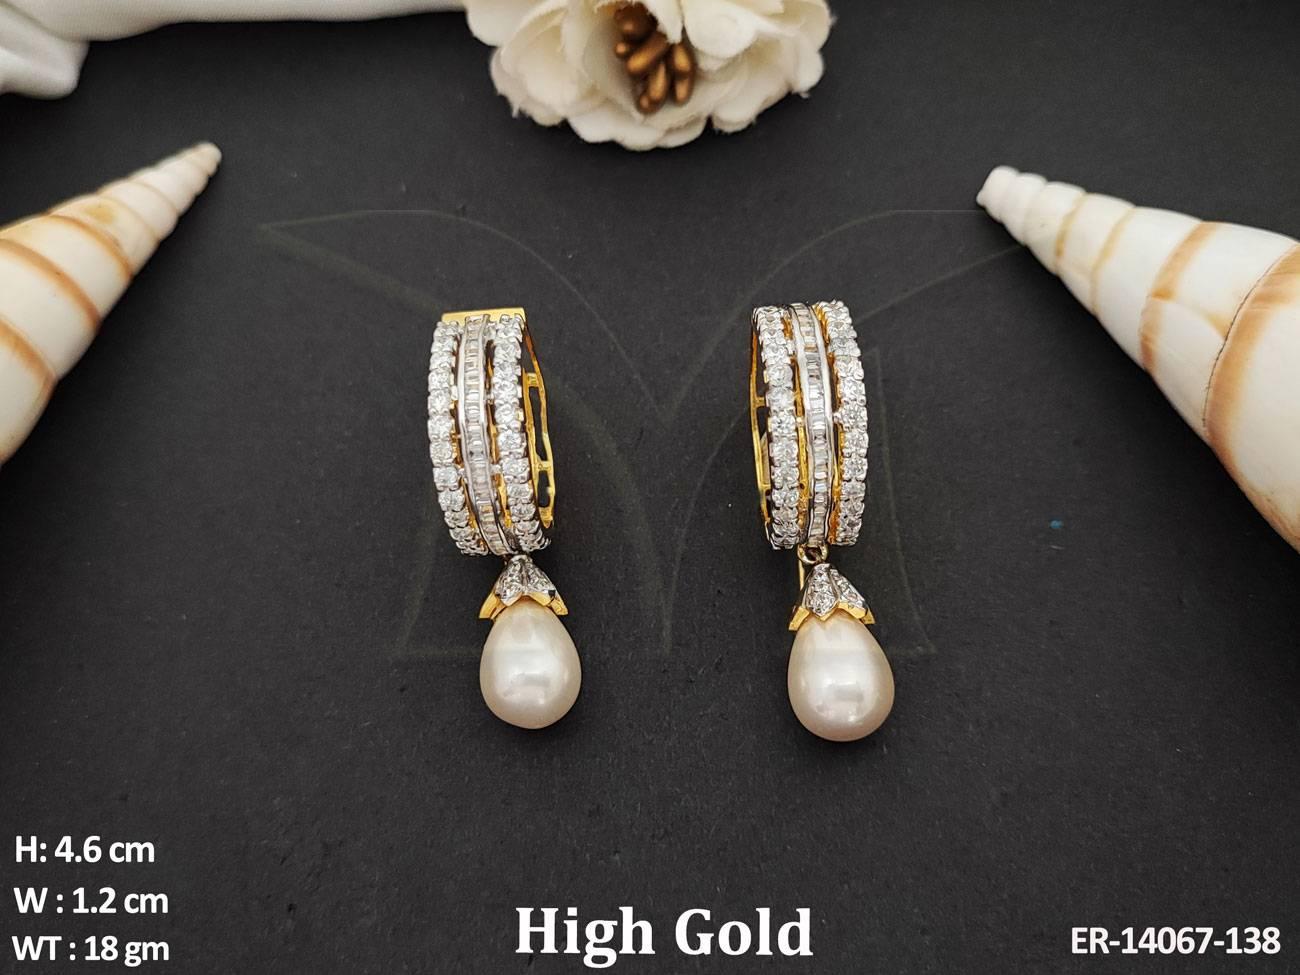 These AD Jewellery Full Stone High Gold Polish Party Wear AD Earrings are perfect for adding a touch of elegance to any outfit.